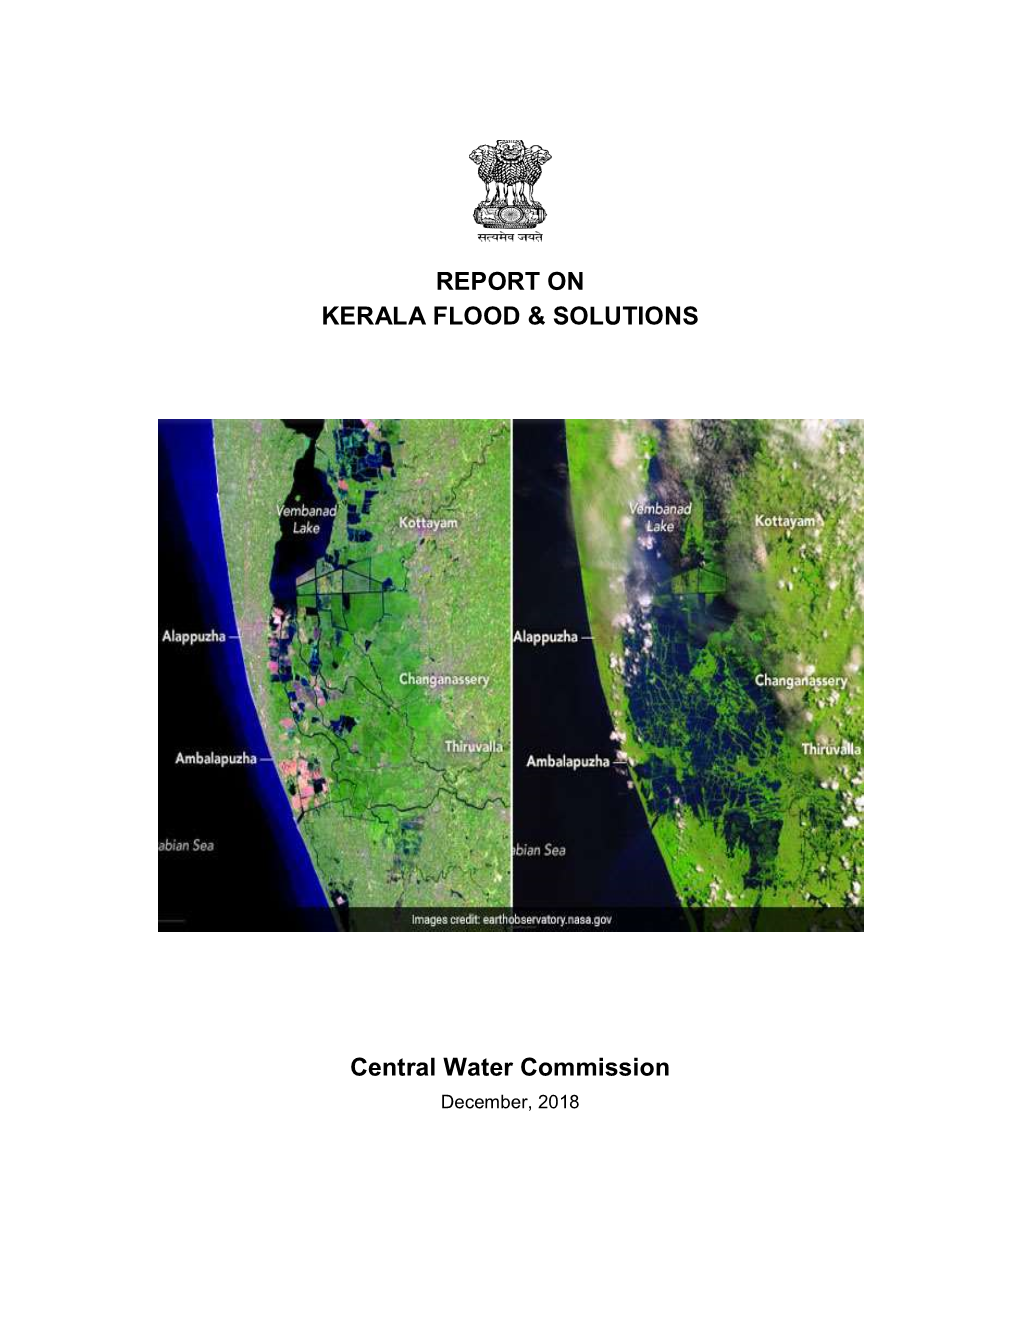 Central Water Commission, 2018. Report on Kerala Flood And